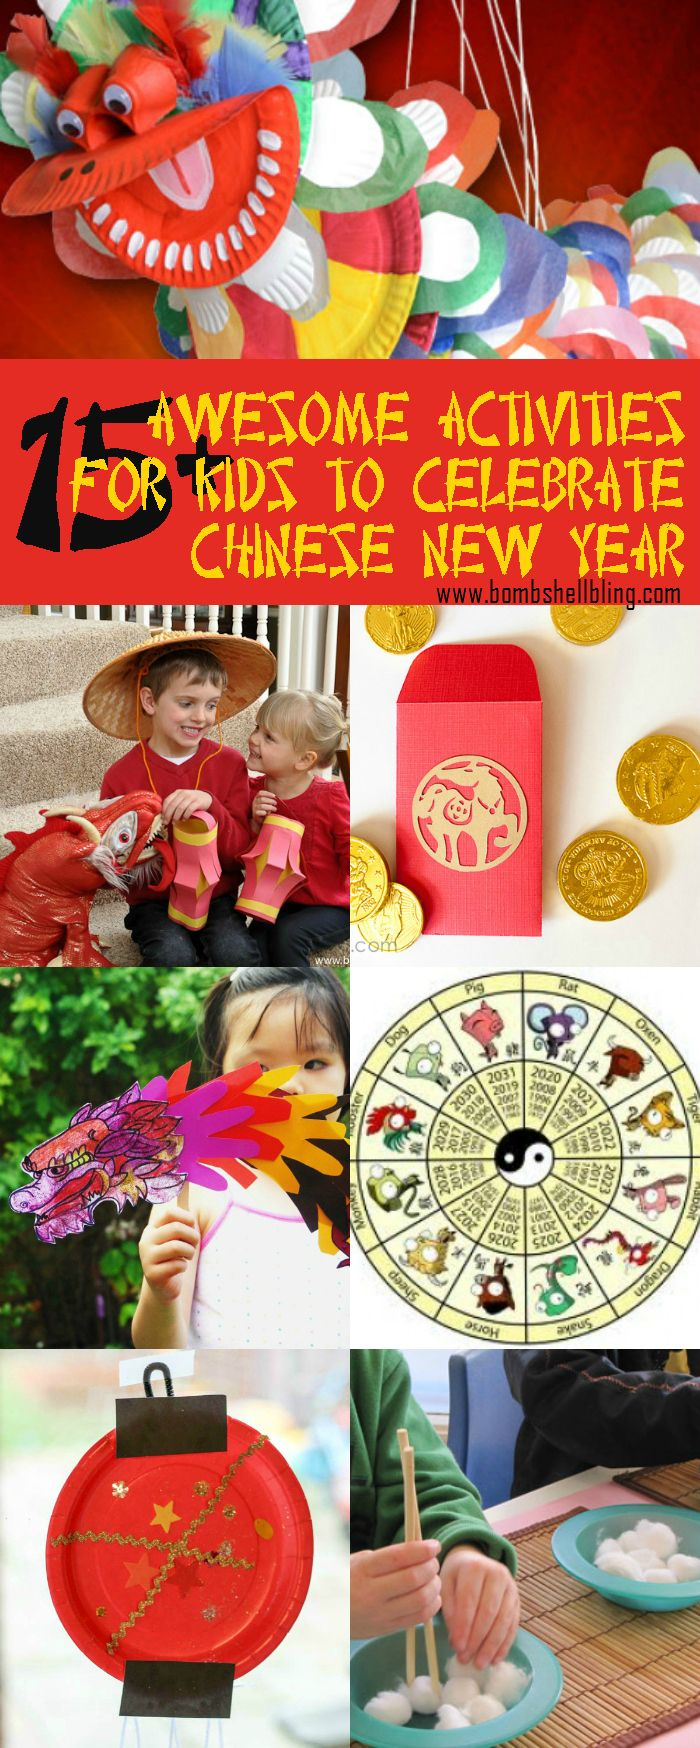 15 Chinese New Year Activities For Kids - I Love These Ideas